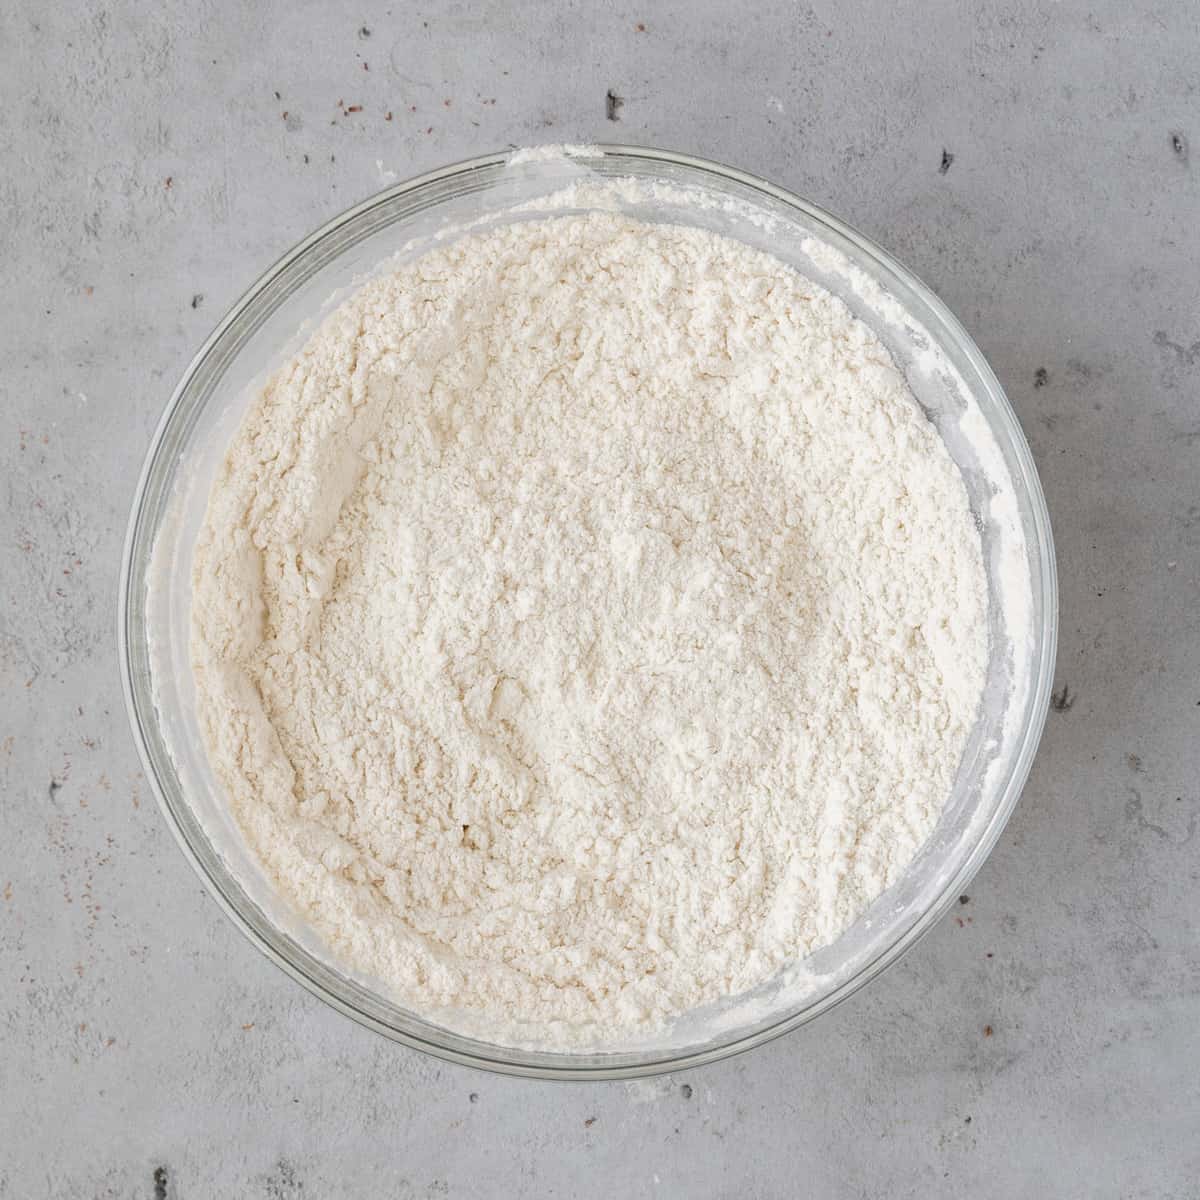 the dry ingredients combined in a glass bowl on a grey background